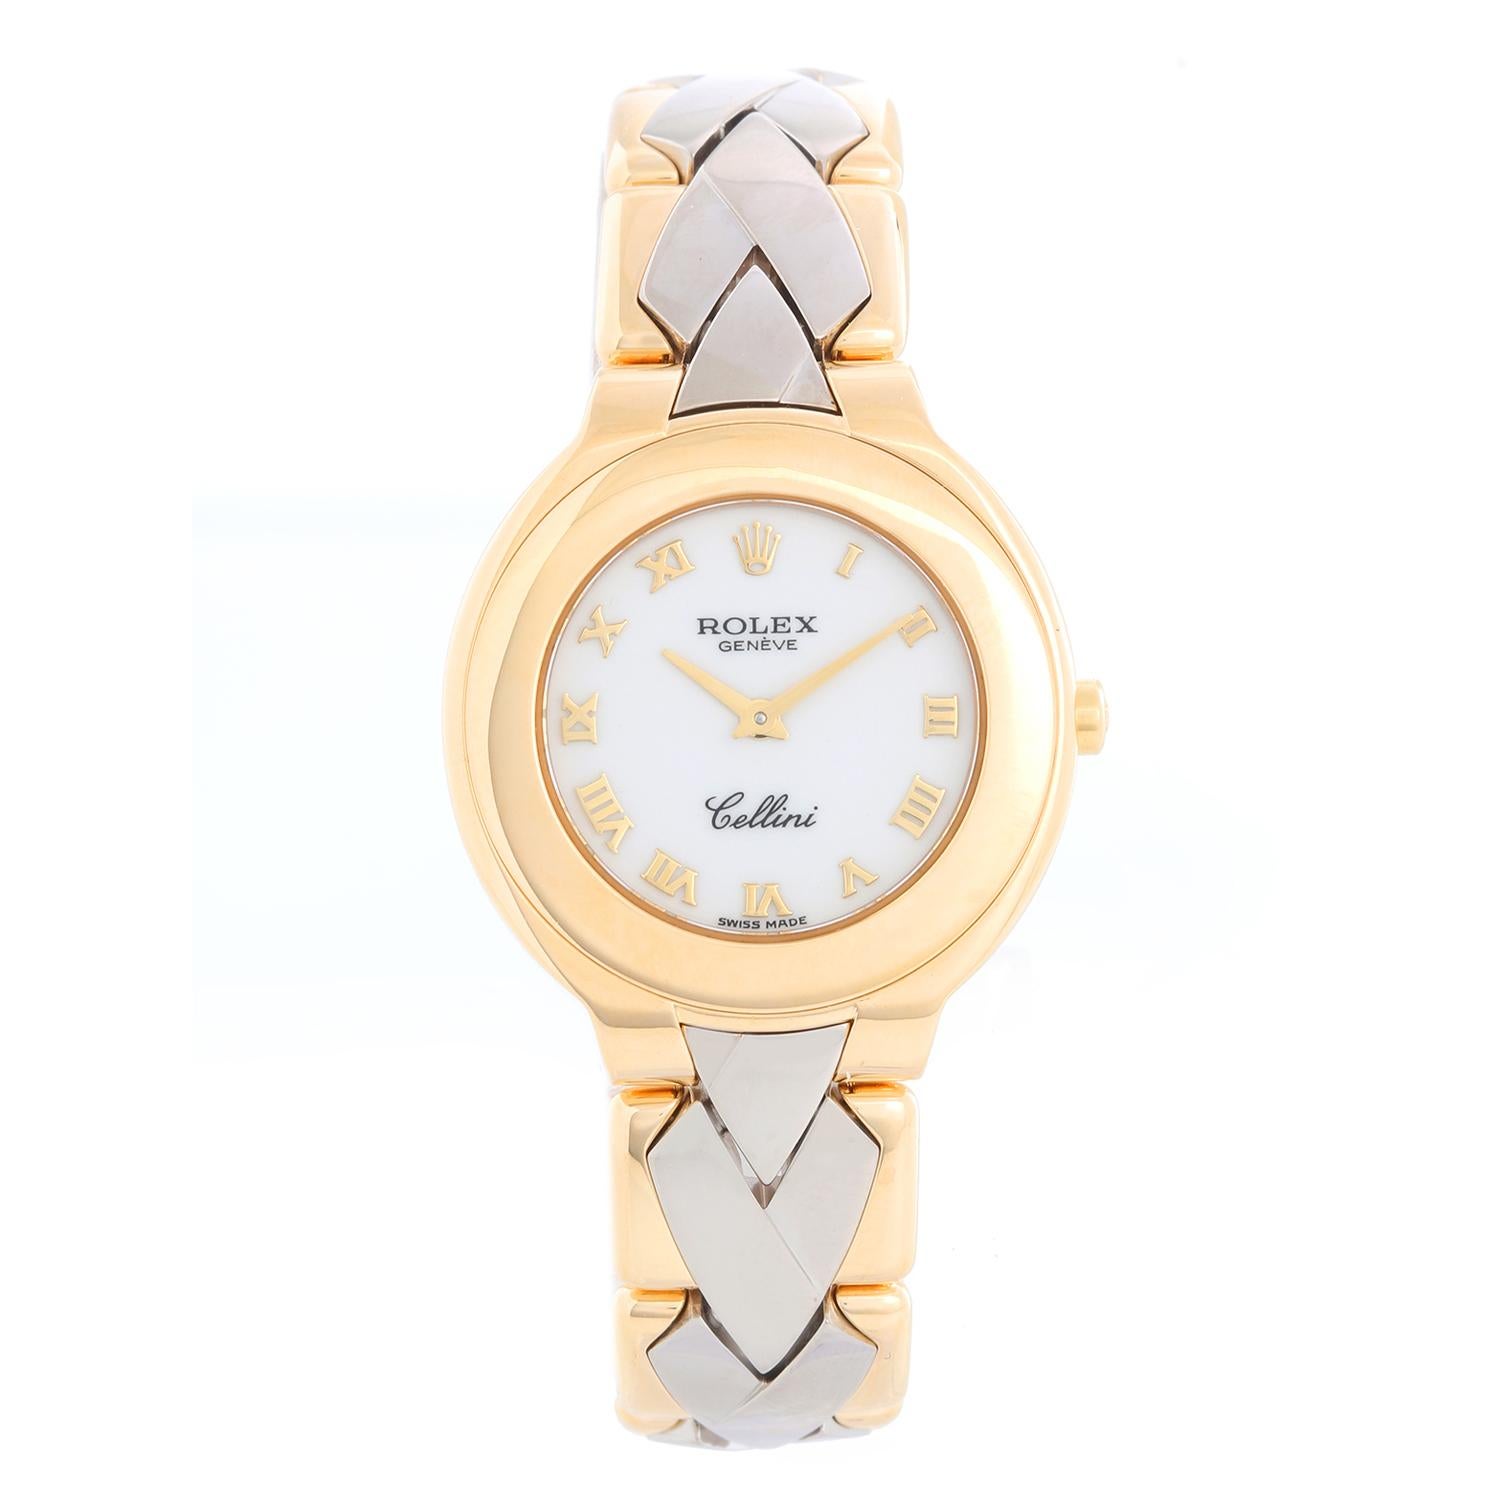 Extremely Rare Rolex Cellini Ladies 18k Yellow Gold & White Gold Watch 6651 - Quartz. 18k yellow gold case (29mm diameter). White dial with gold raised roman numerals. White gold and yellow gold bracelet; measures a 5 1/2 inch wrist. Pre-owned with